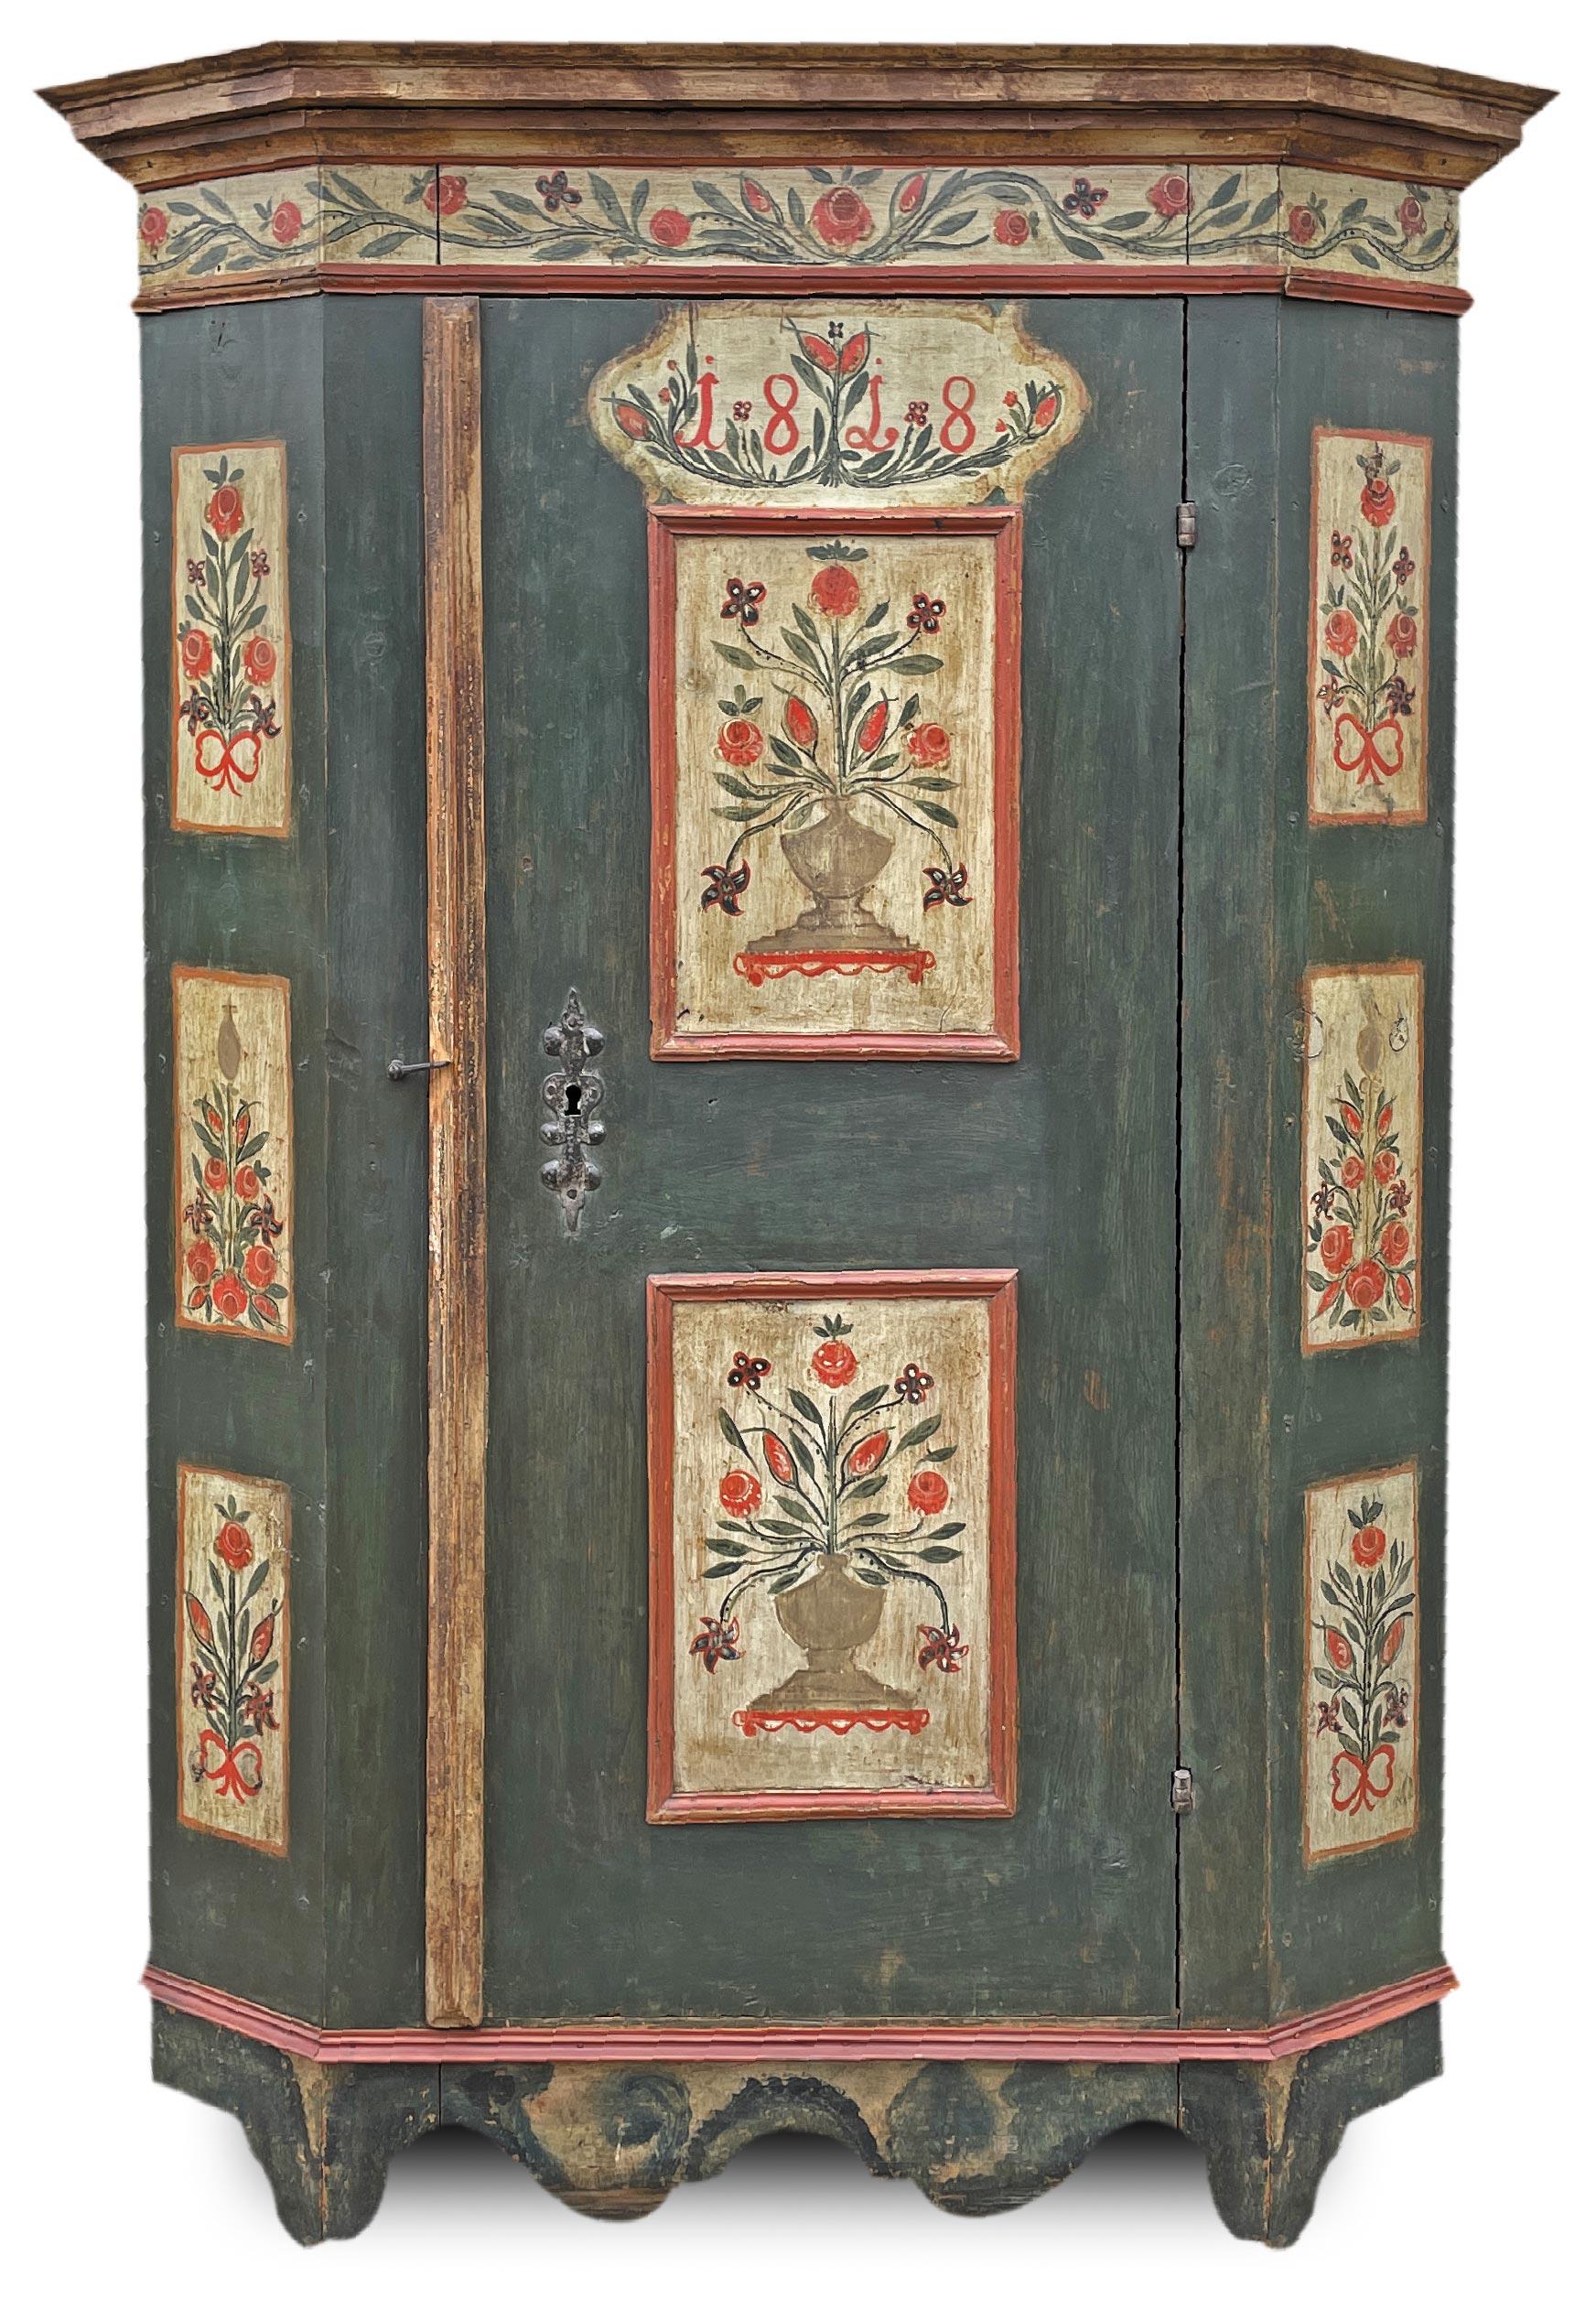 Tyrolean wardrobe dated 1818

H. 178 cm – L. 116 cm (132cm at the frames) – P. 43 cm (50 at the frames)

Beautiful one-door Tyrolean wardrobe, in fir wood, entirely painted in petrol green colour, with brick red frames that create a pleasant